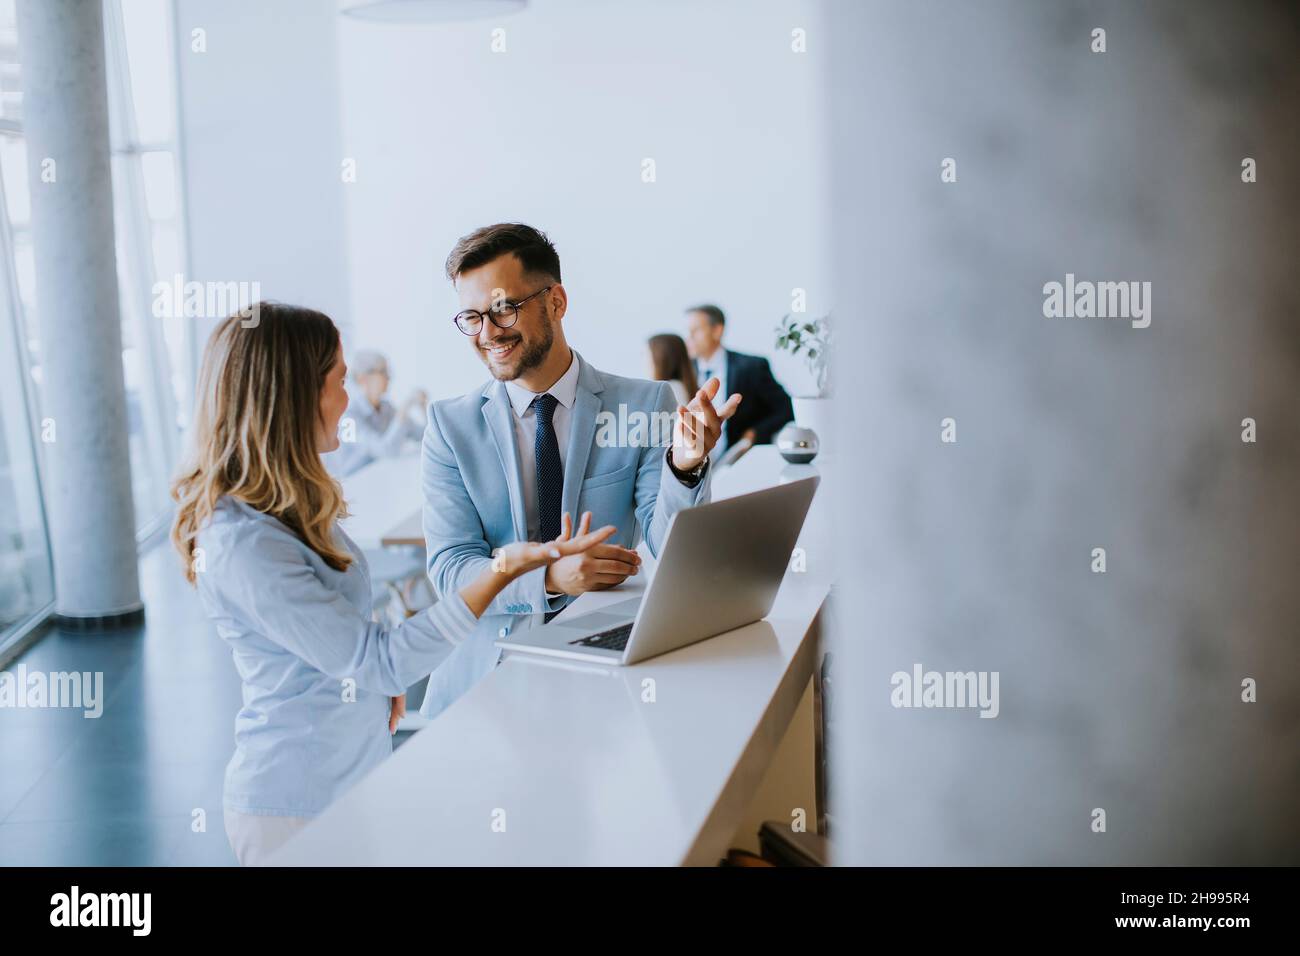 Young business couple working and discussing by laptop in the office in front of their team Stock Photo